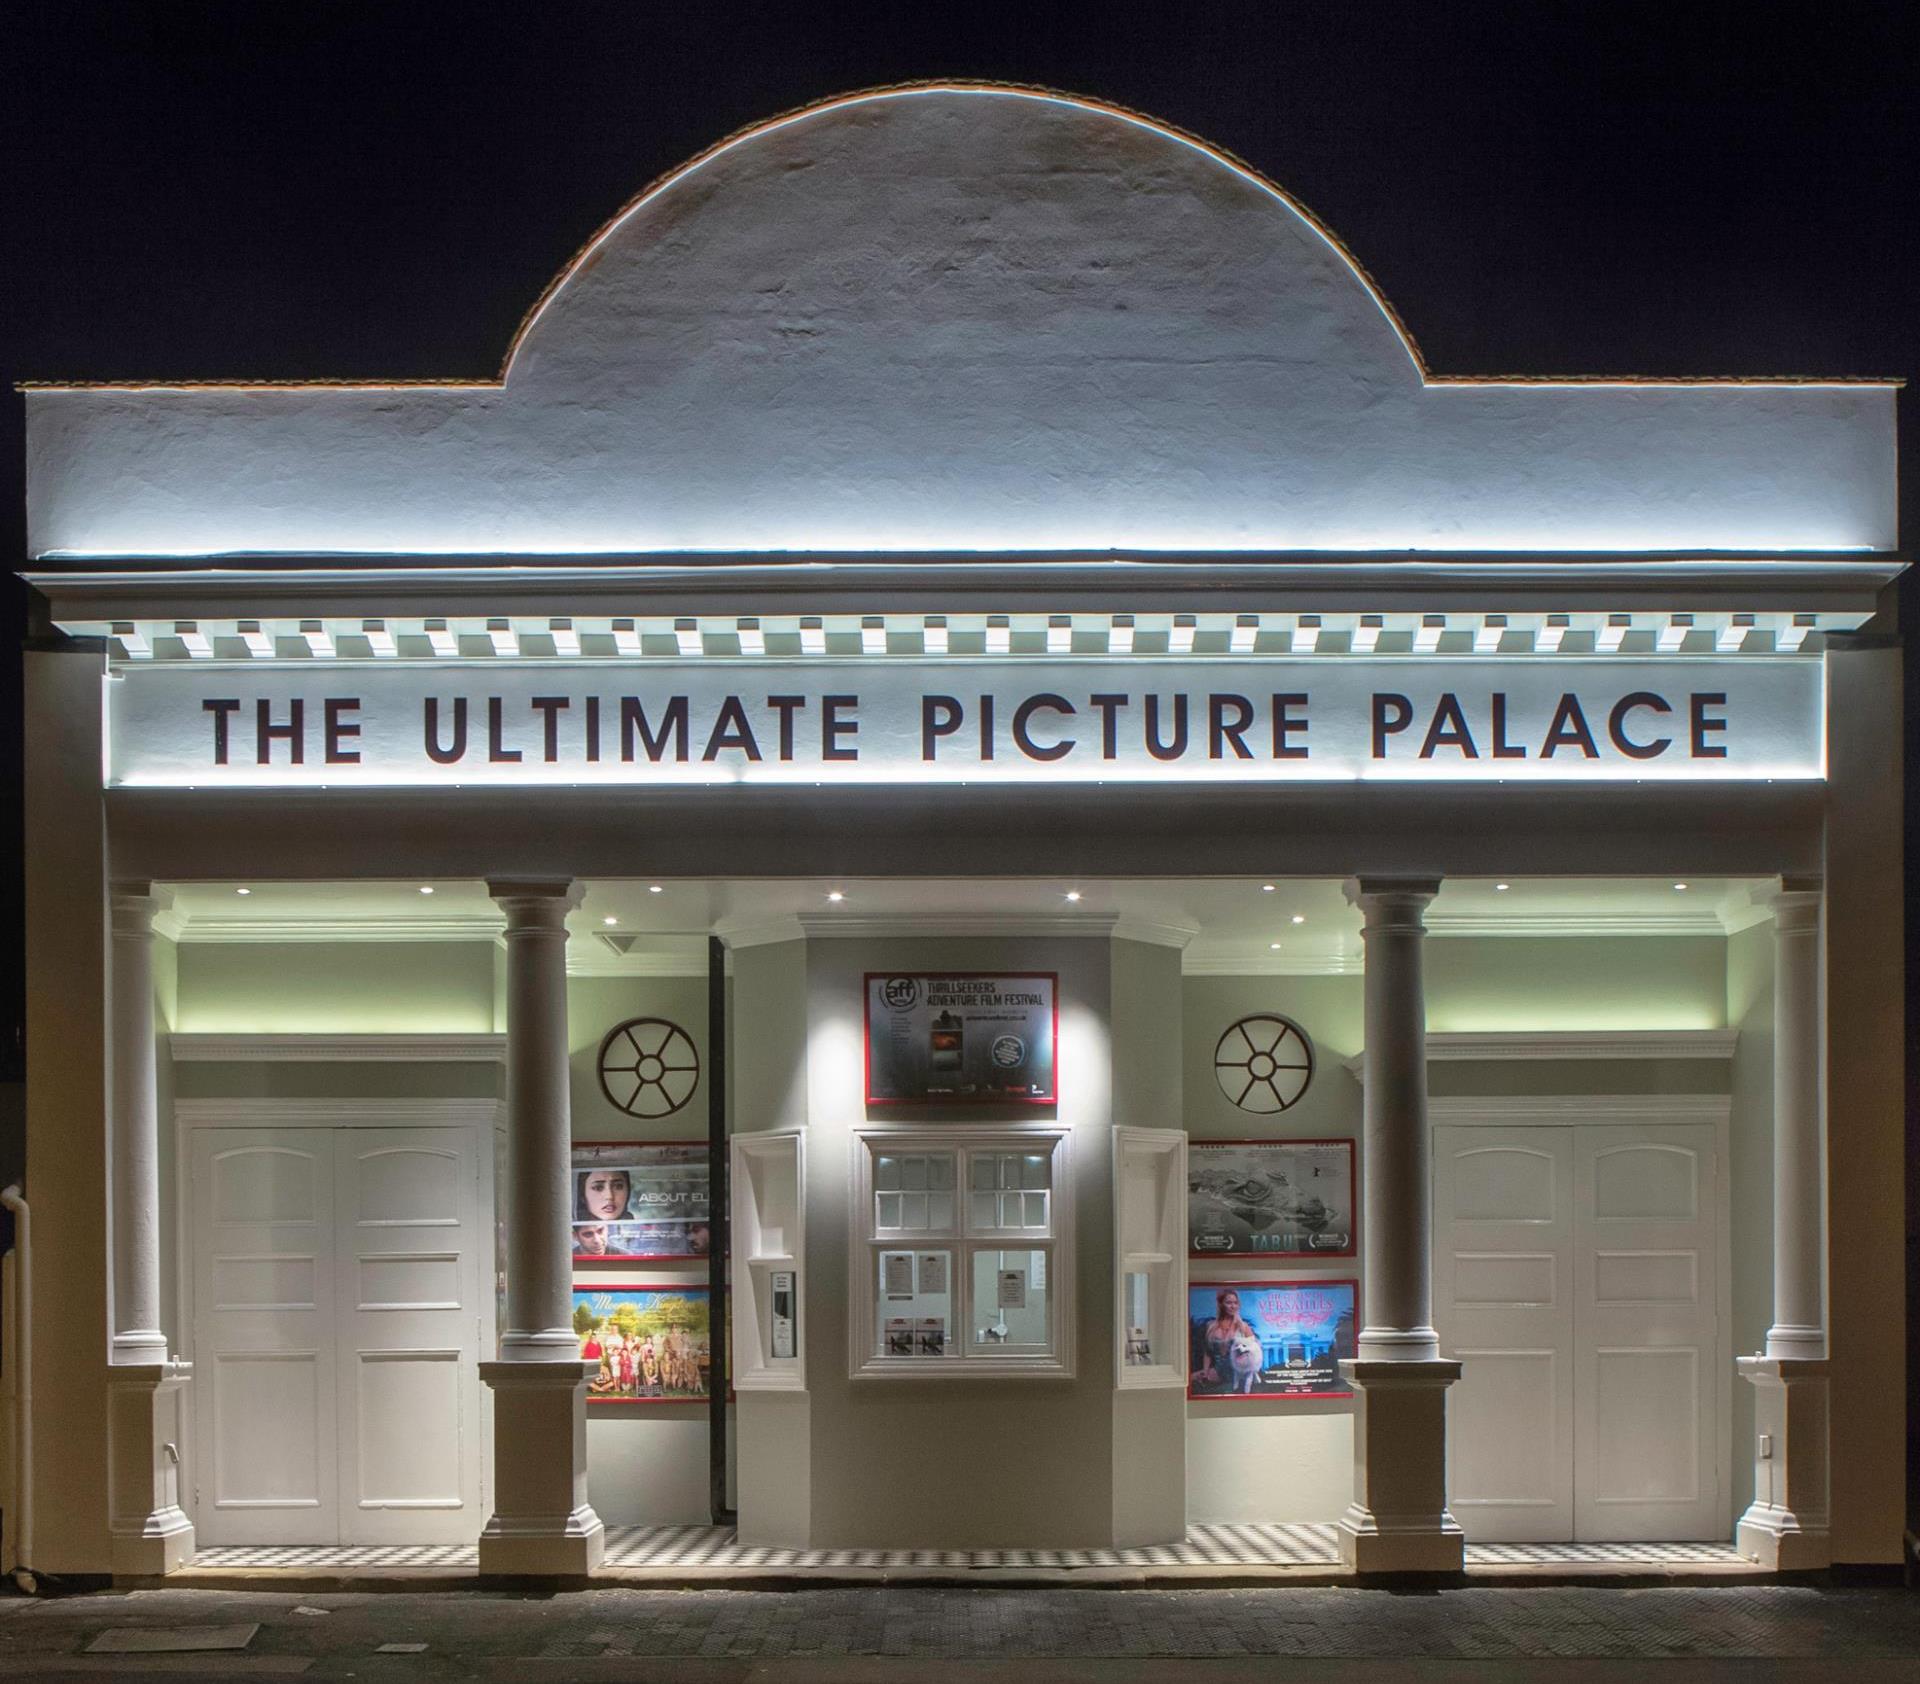 Life is theater. The Ultimate picture Palace. Ultimate pictures.